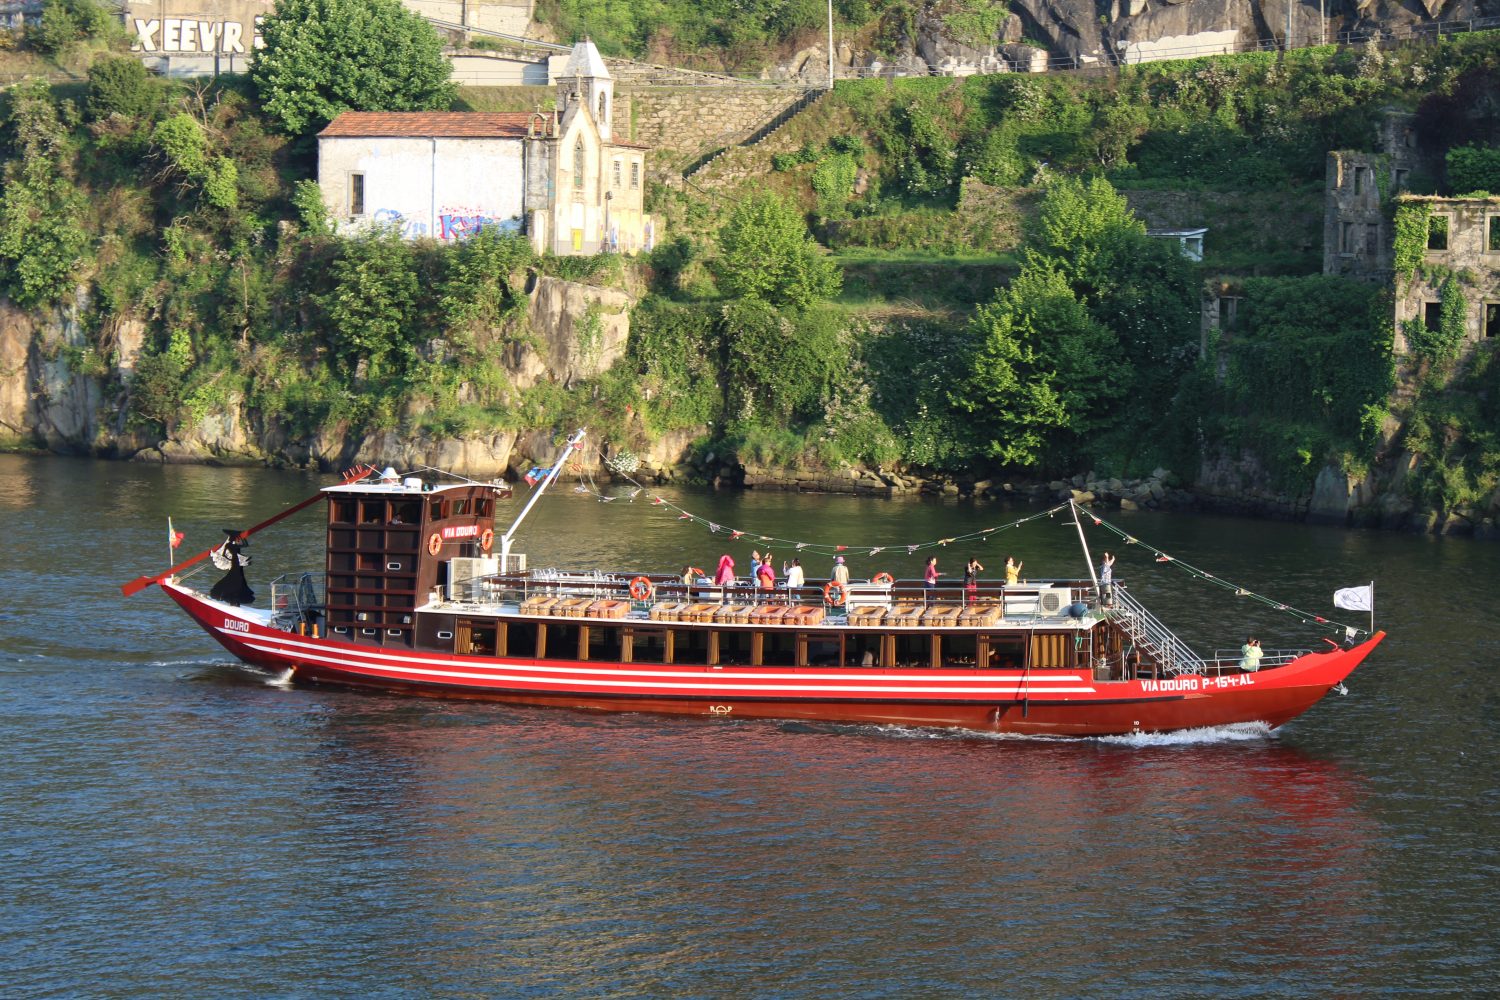 Douro cruise with lunch or dinner on board with view over Vila Nova de Gaia